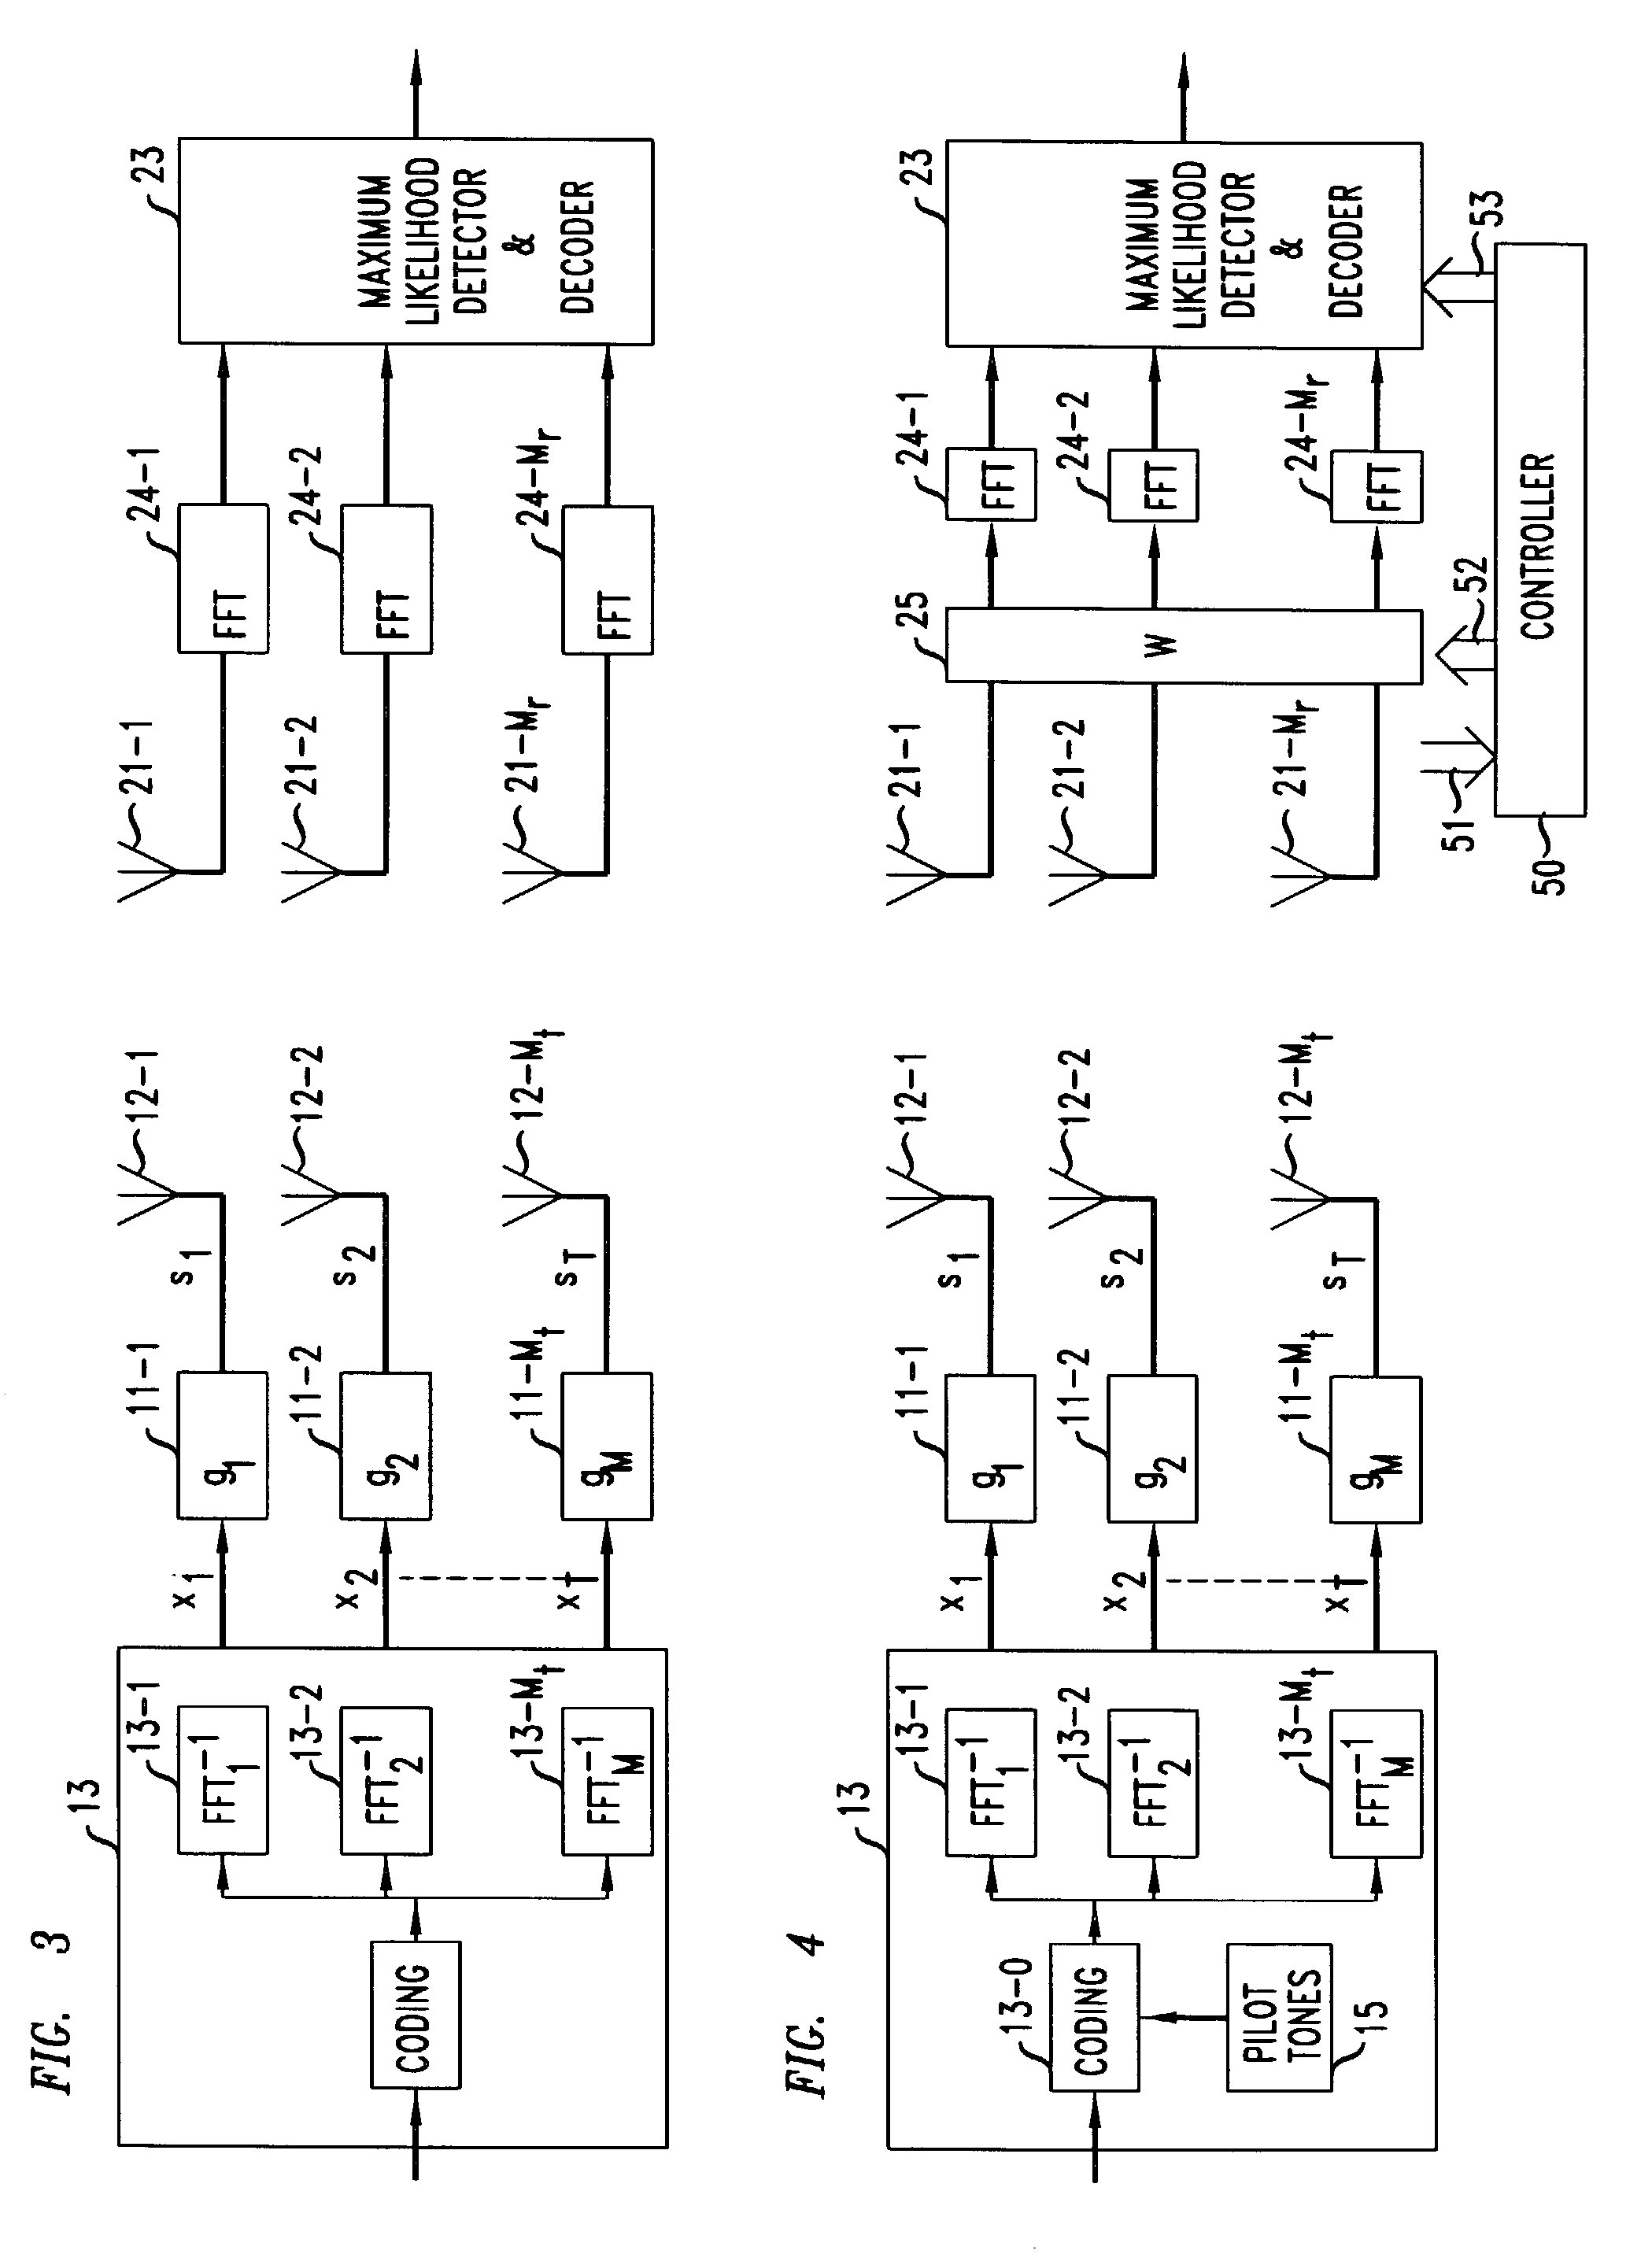 Amelioration in inter-carrier interference in OFDM